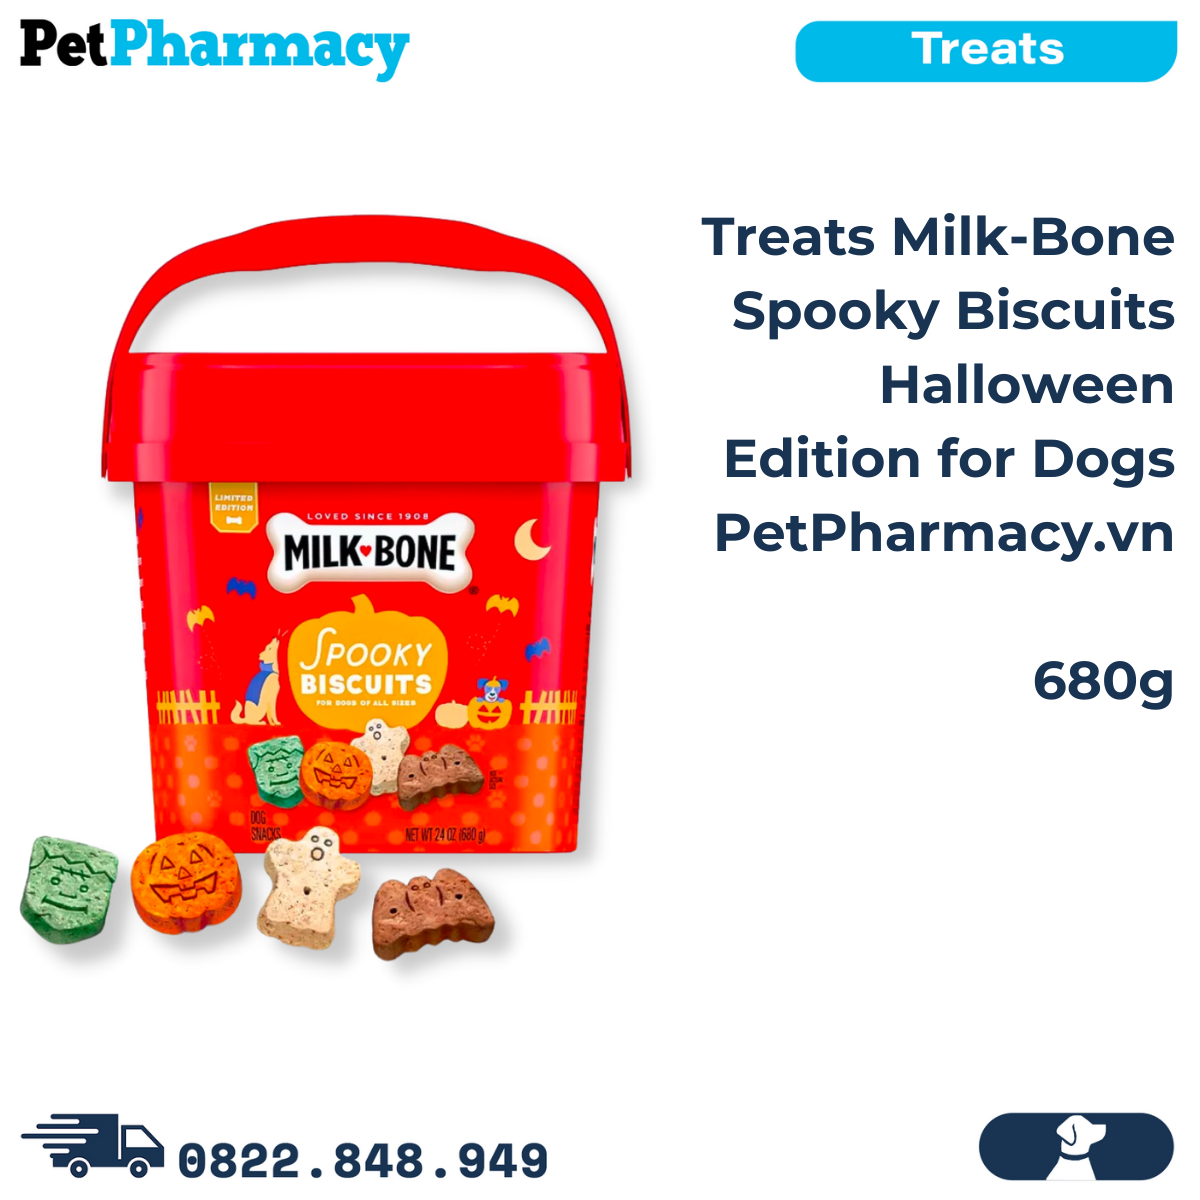  Treats Milk-Bone Spooky Biscuits Halloween Edition for Dogs 680g PetPharmacy 